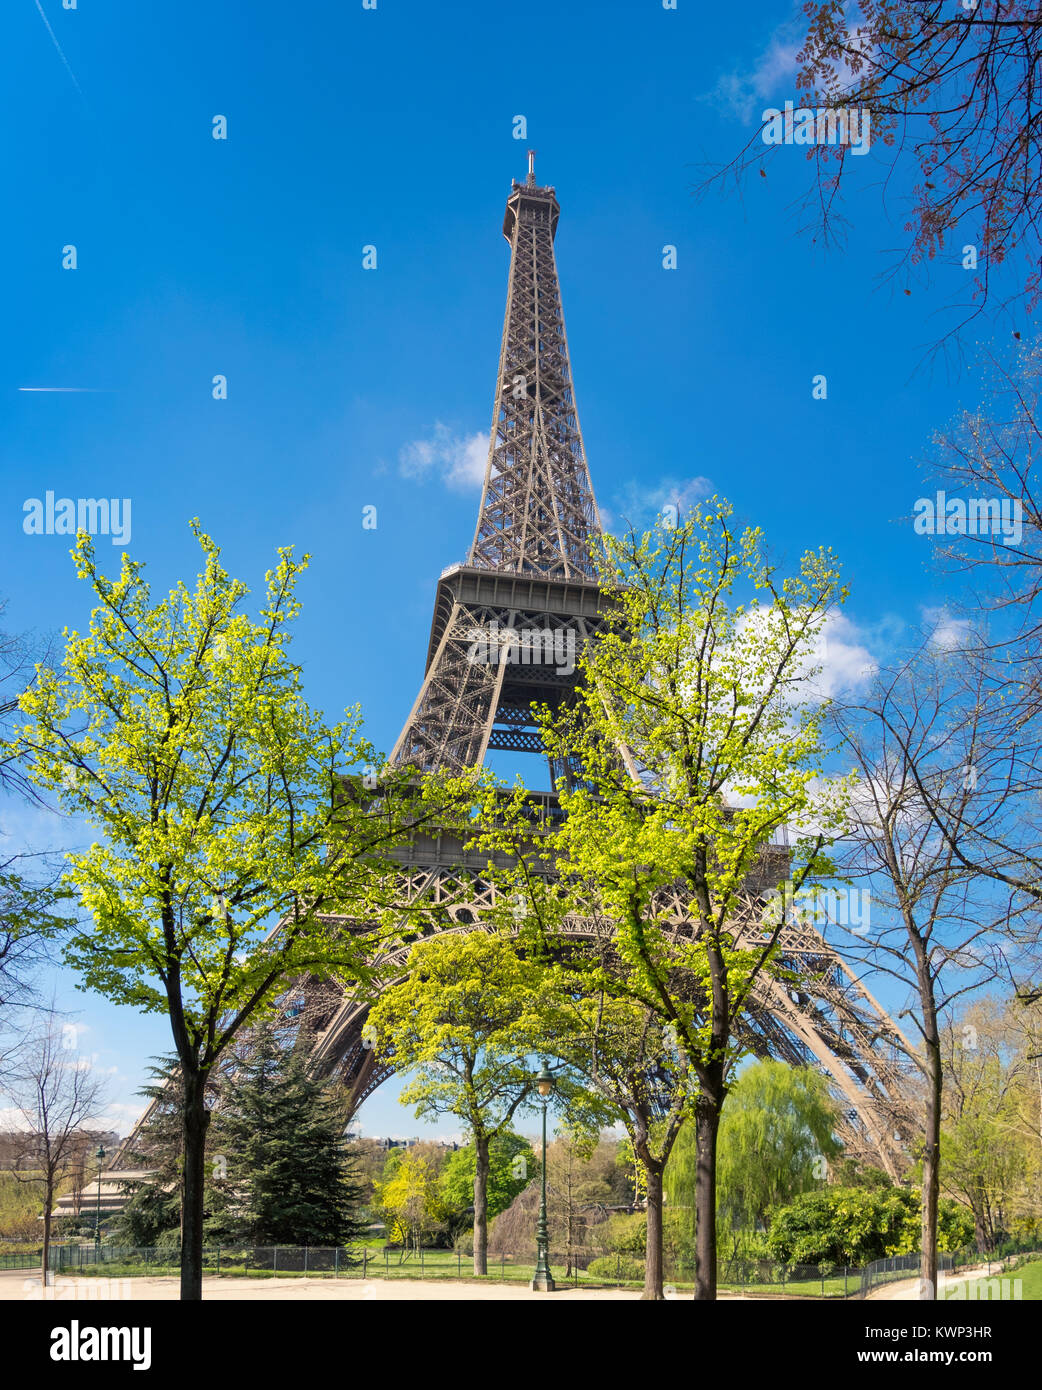 Paris, Eiffel tower on a bright day in Spring with green trees and leaves in front, panoramic image Stock Photo